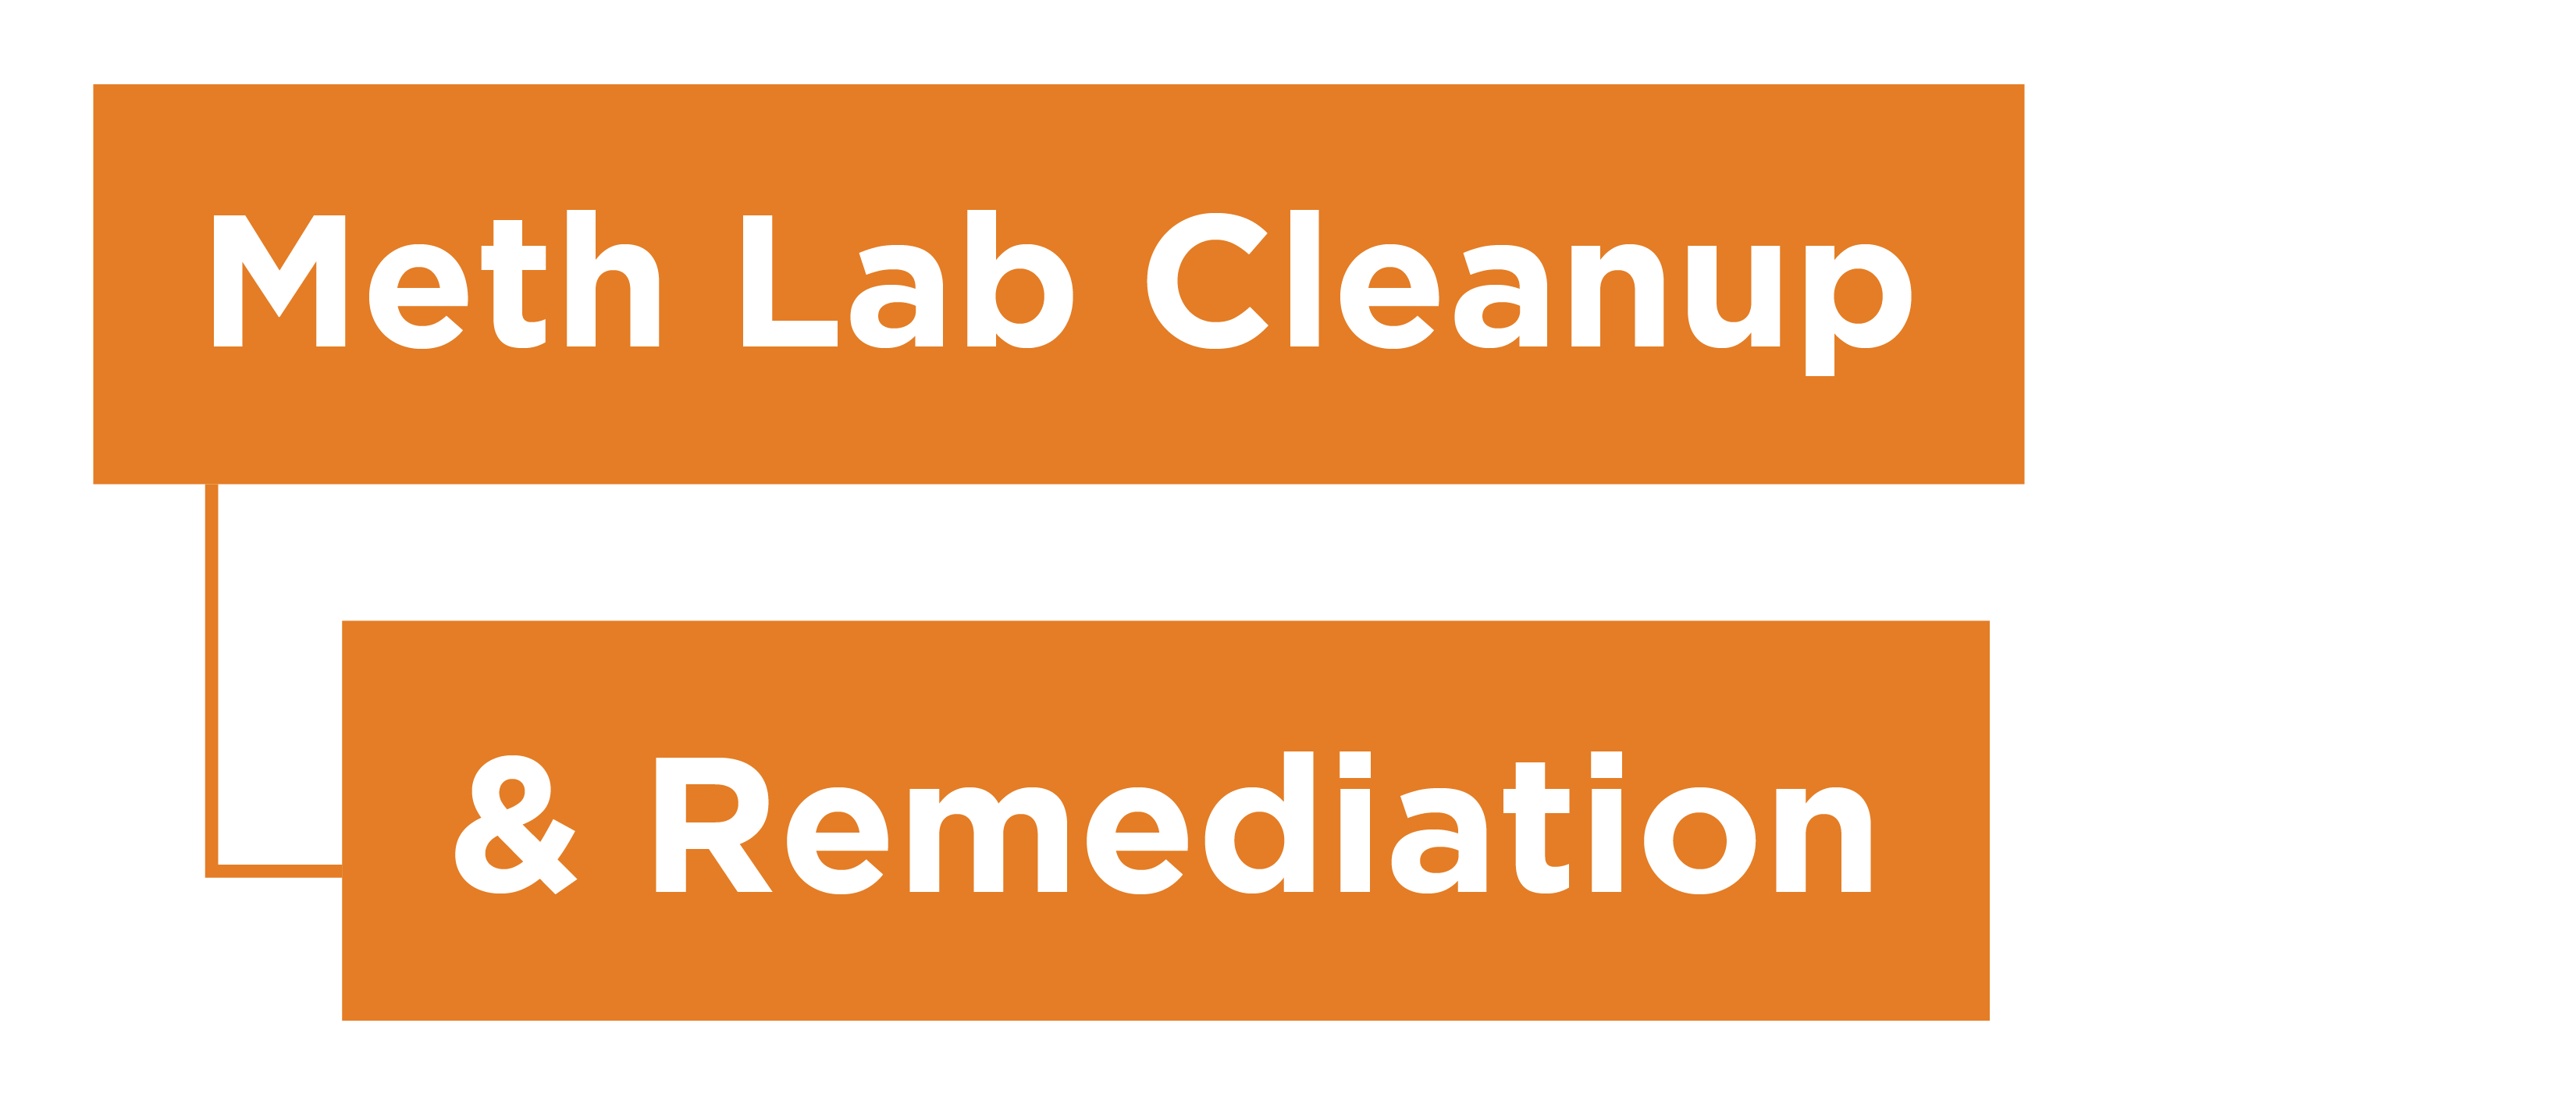 meth lab cleanup and remediation